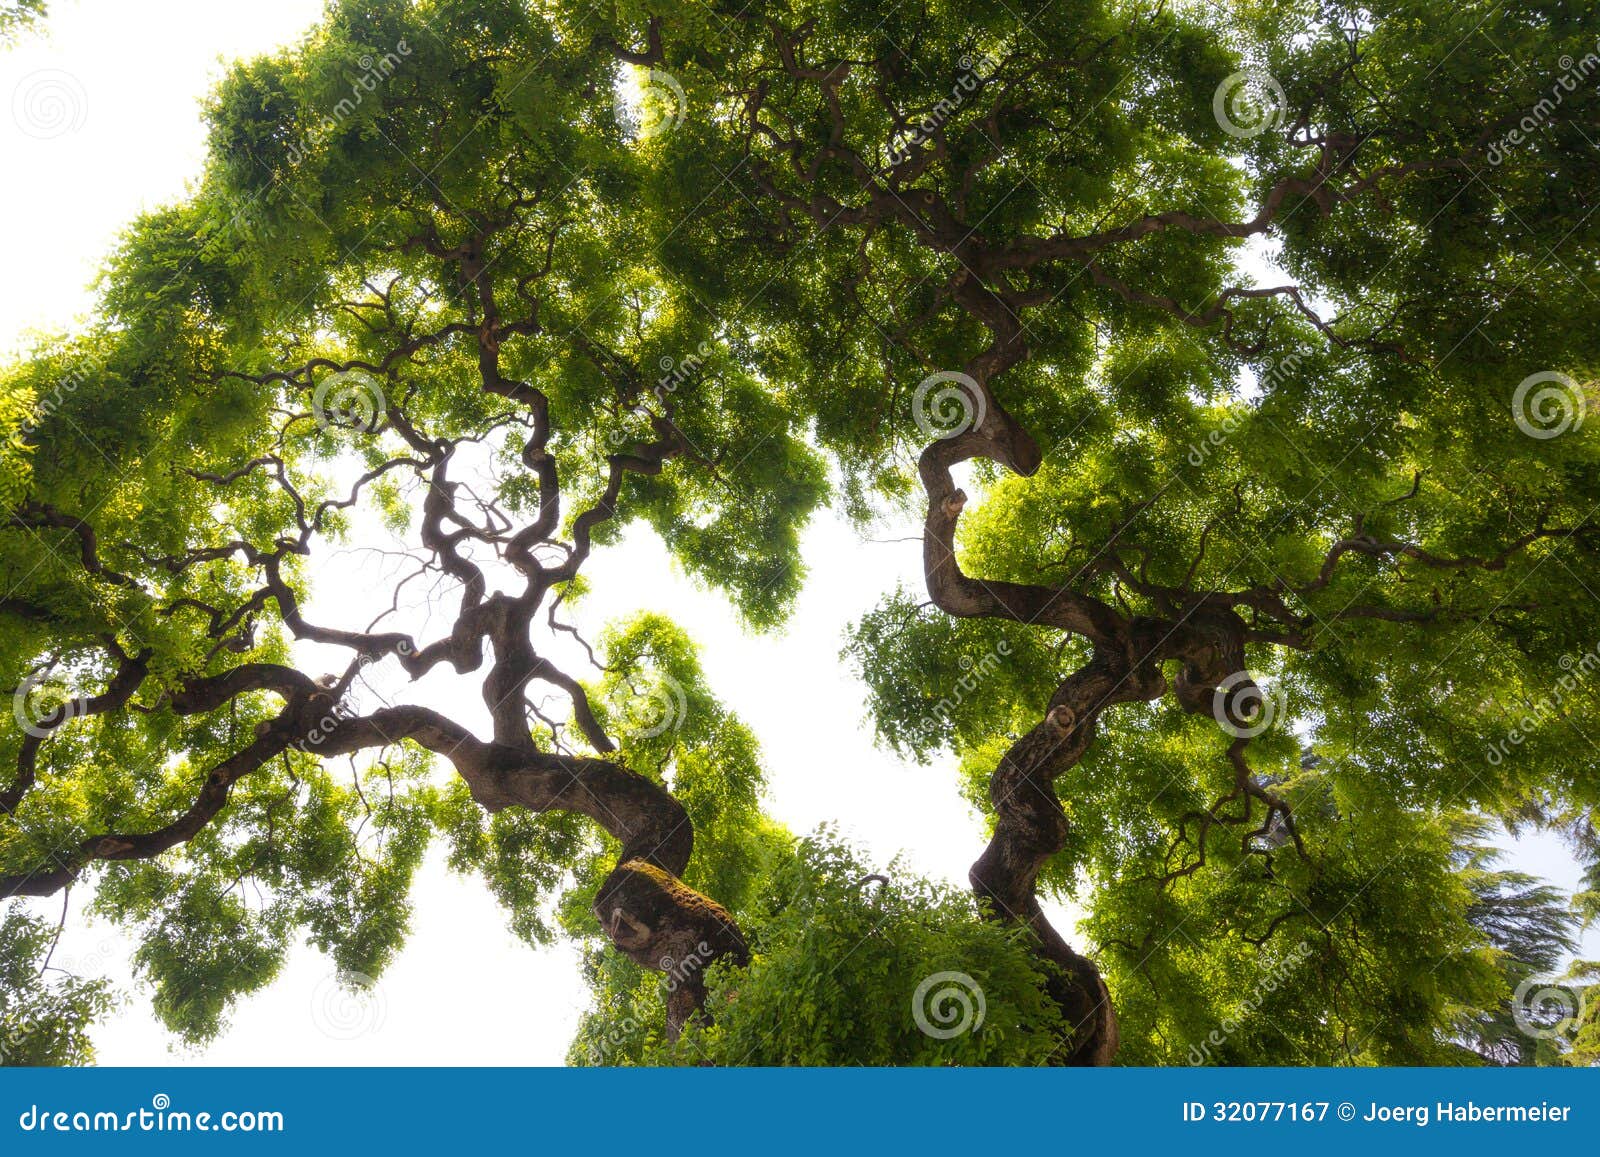 impressive, green crown of tall, large elm tree with gnarled, twisted branches